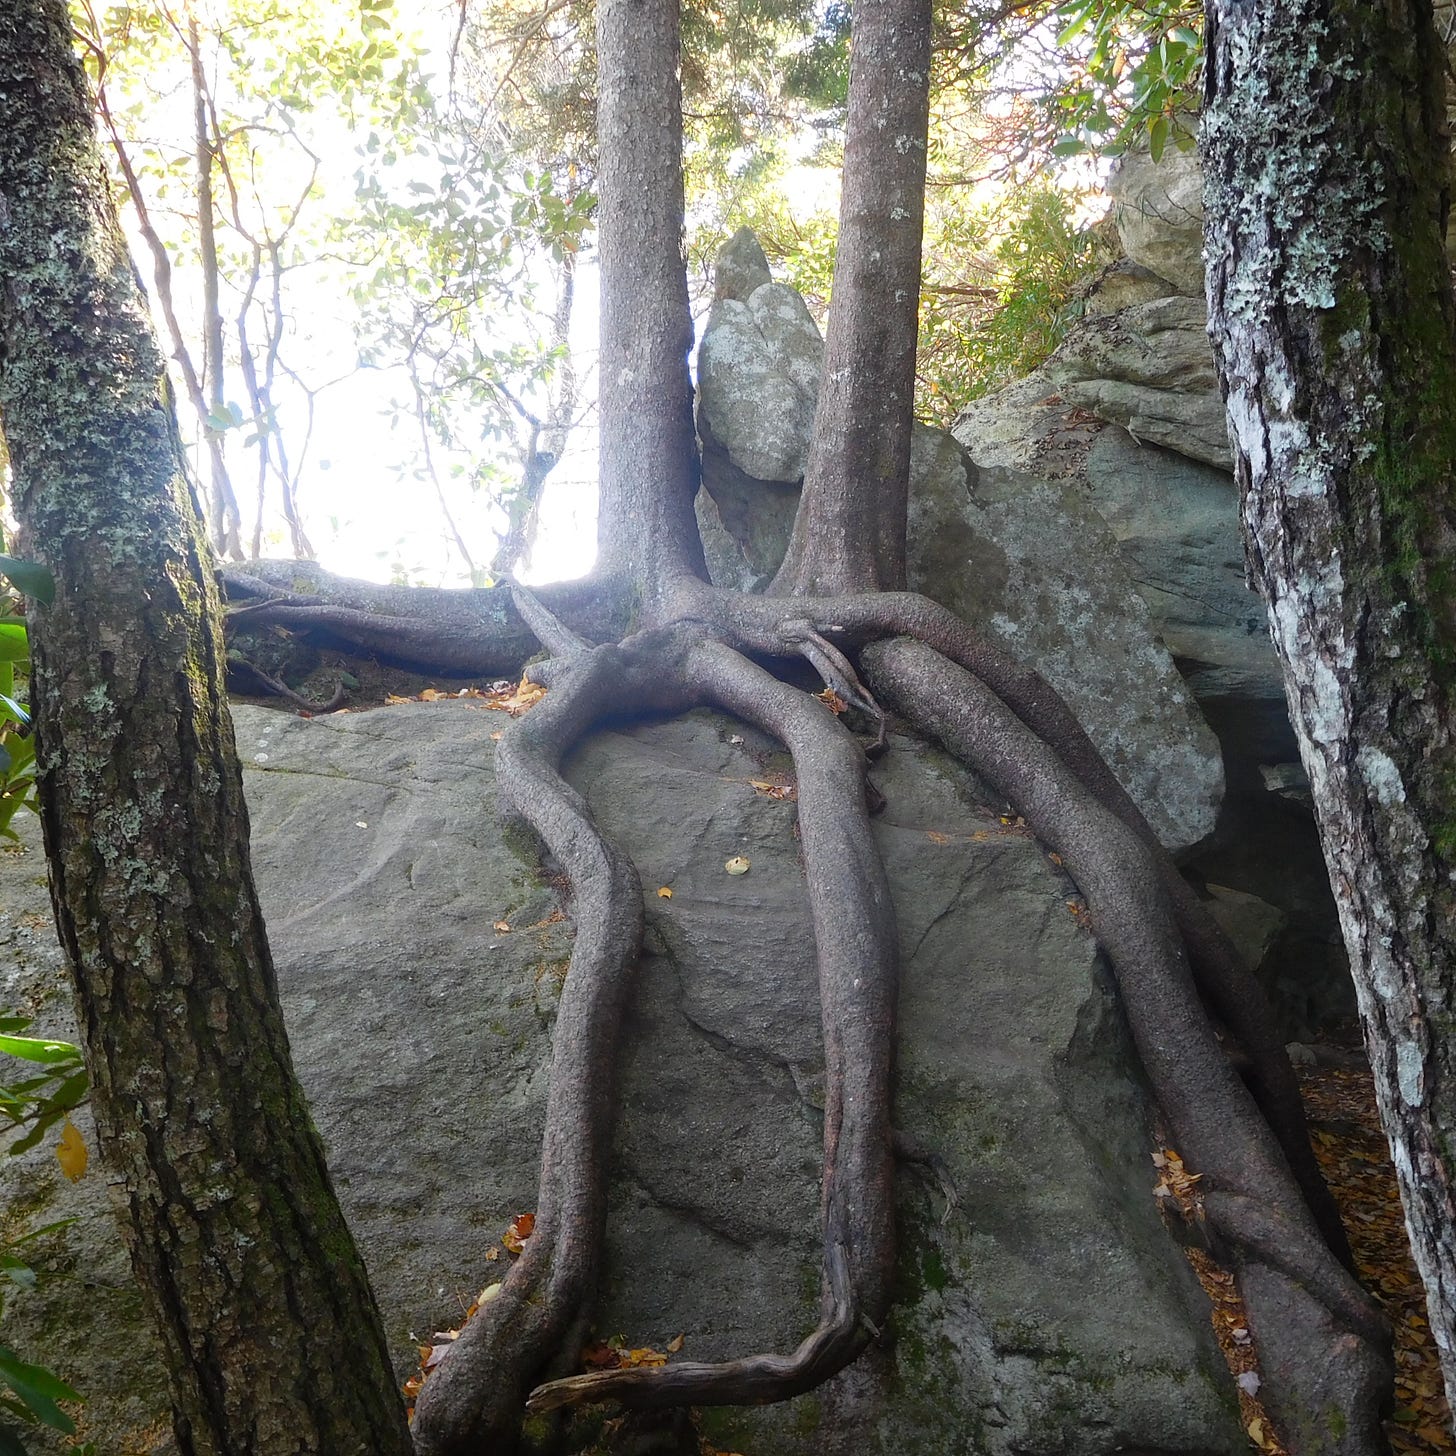 Two trees grow straight from a large boulder, down which thick roots are crossed and joined.